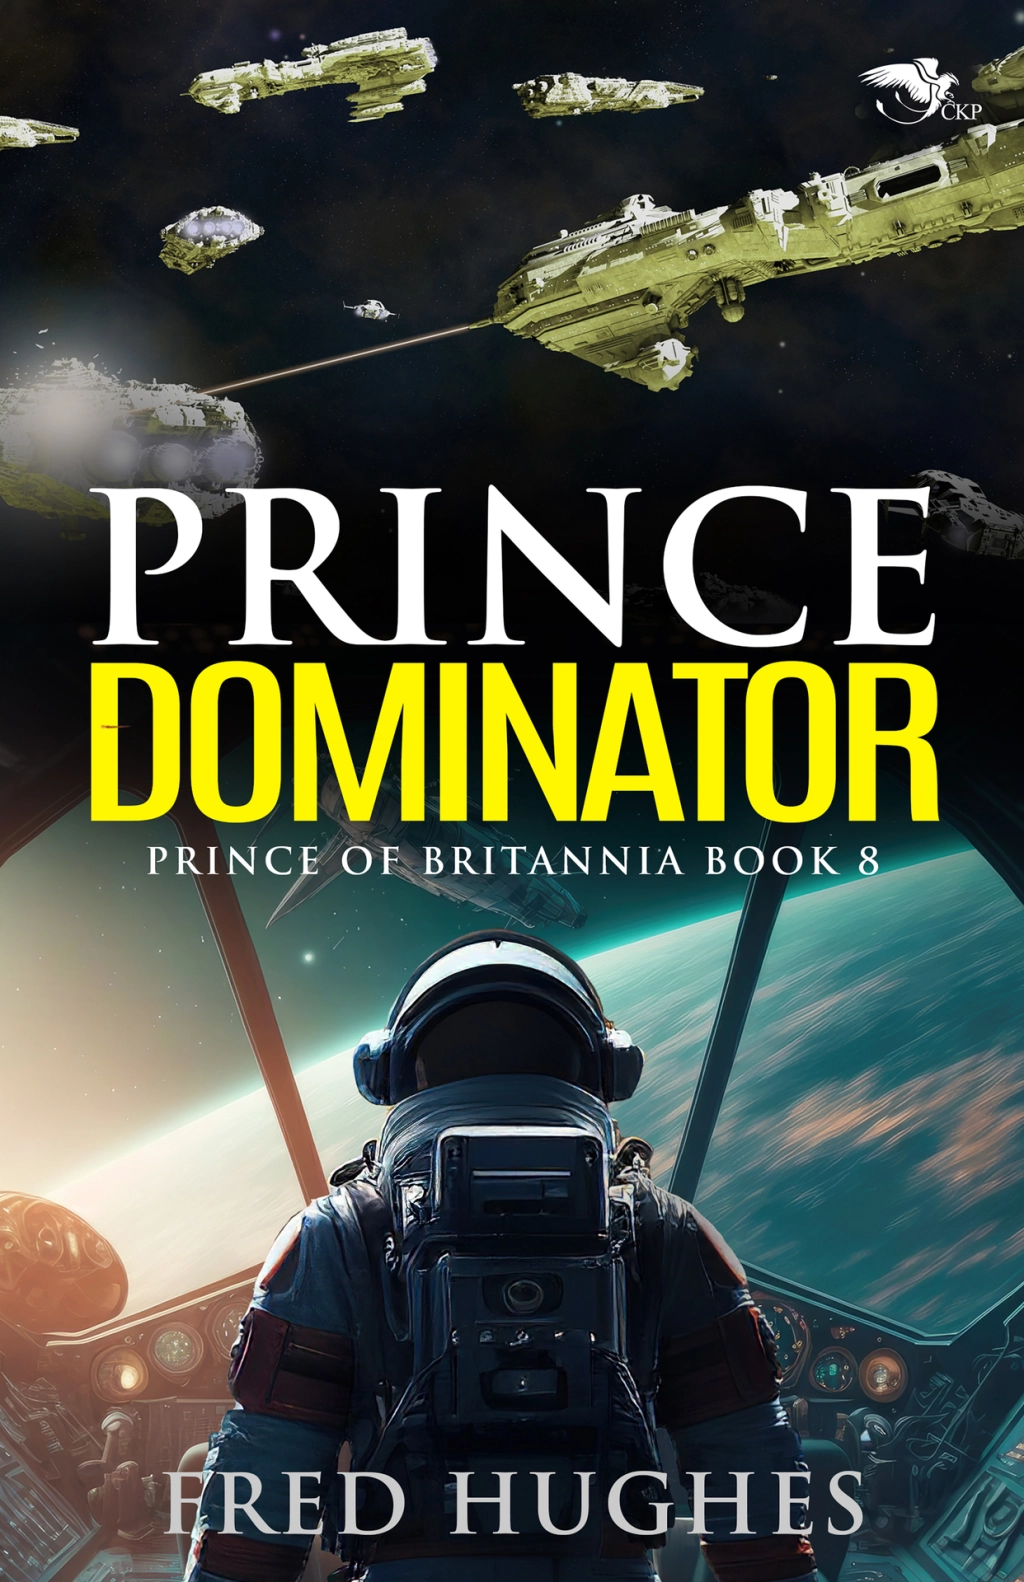 Prince Dominator – Great military space opera.